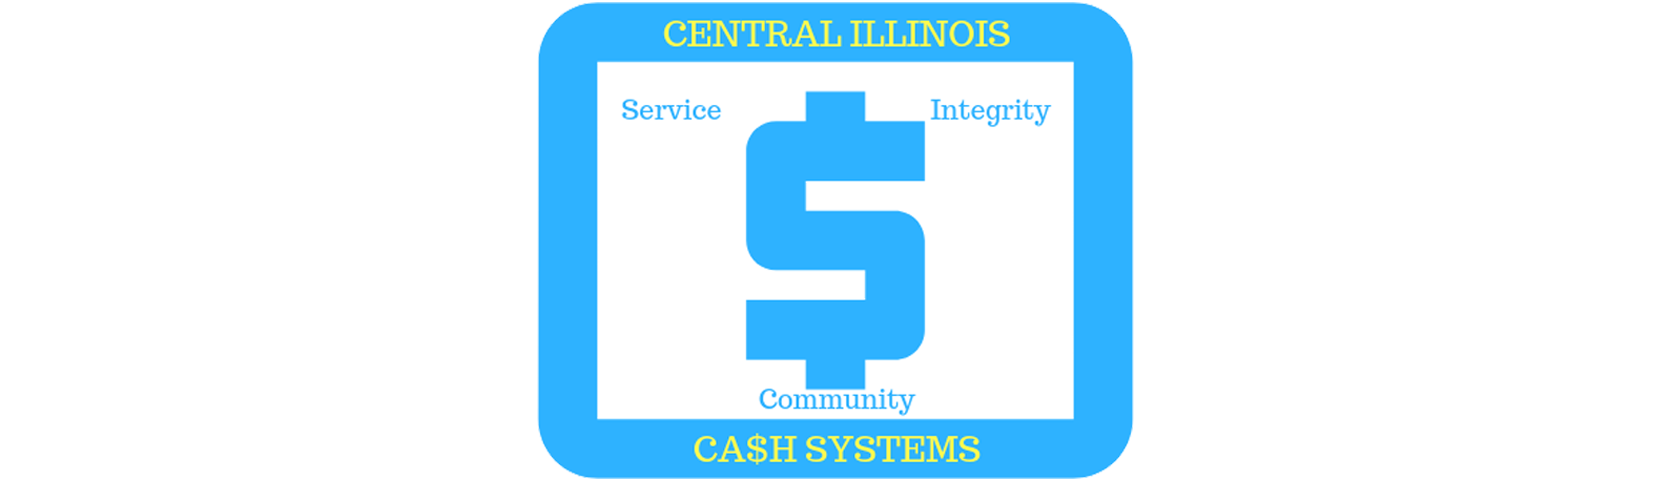 Central Illinois Cash Systems